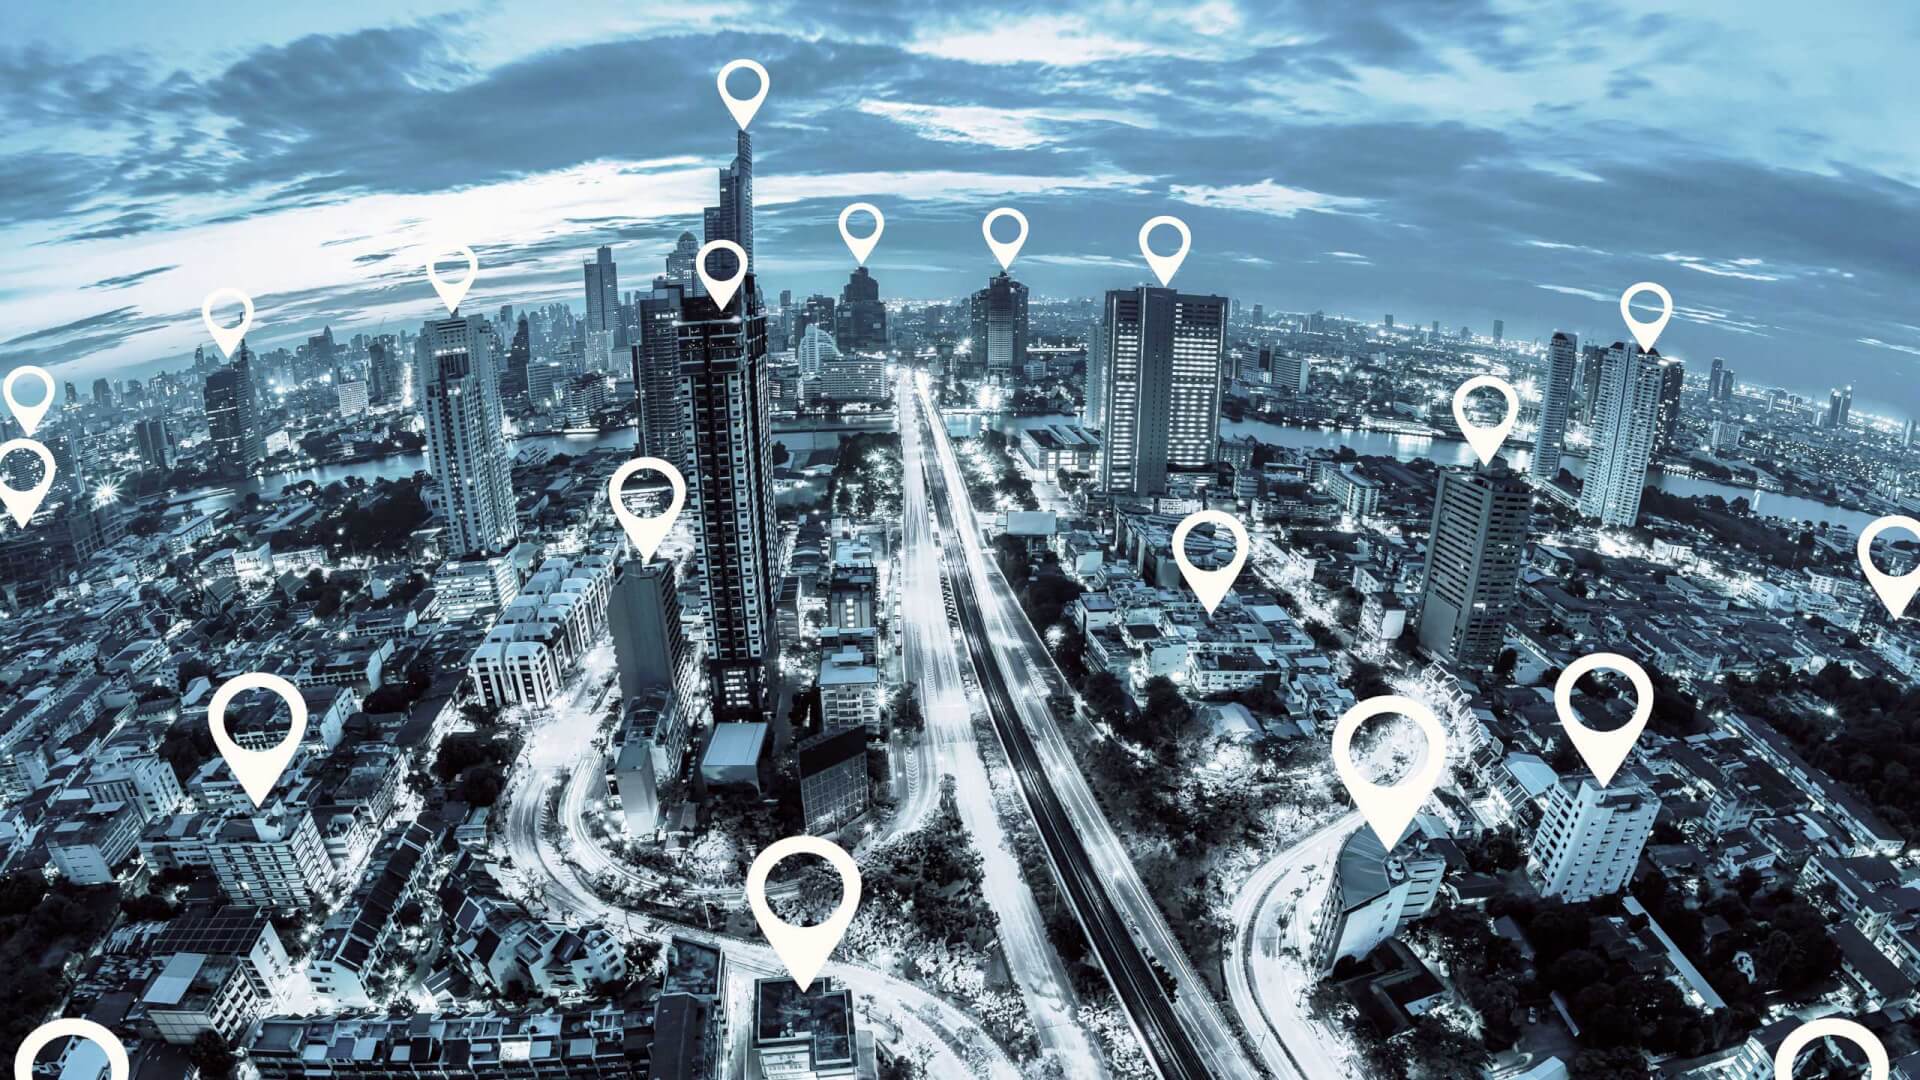 Location Intelligence Solutions for Business | CoreLogic®